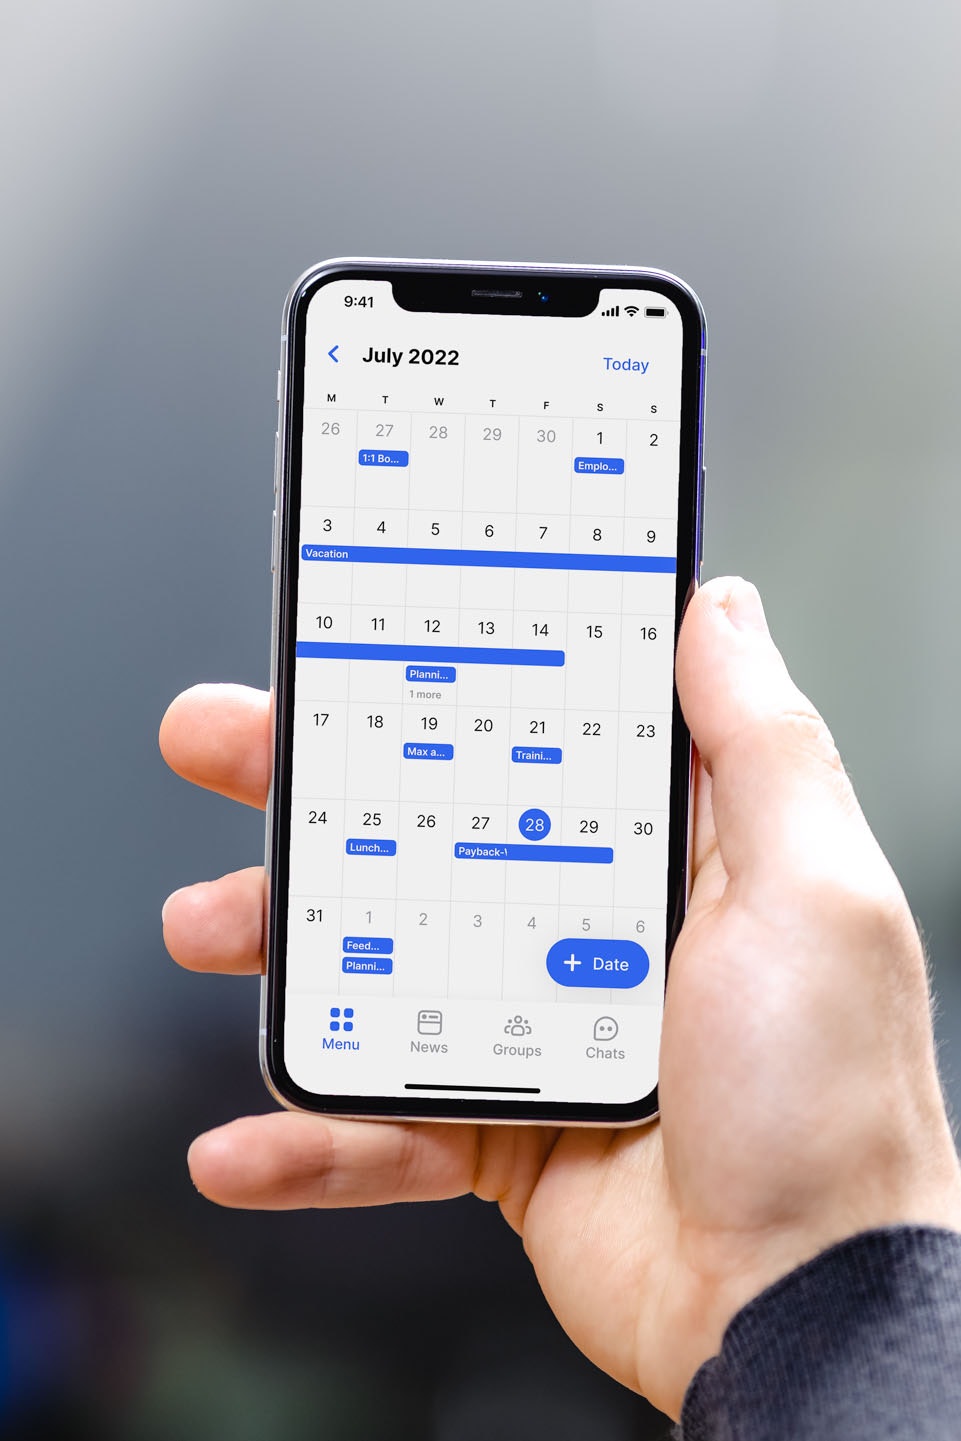 Smartphone mockup shows a calendar in the display